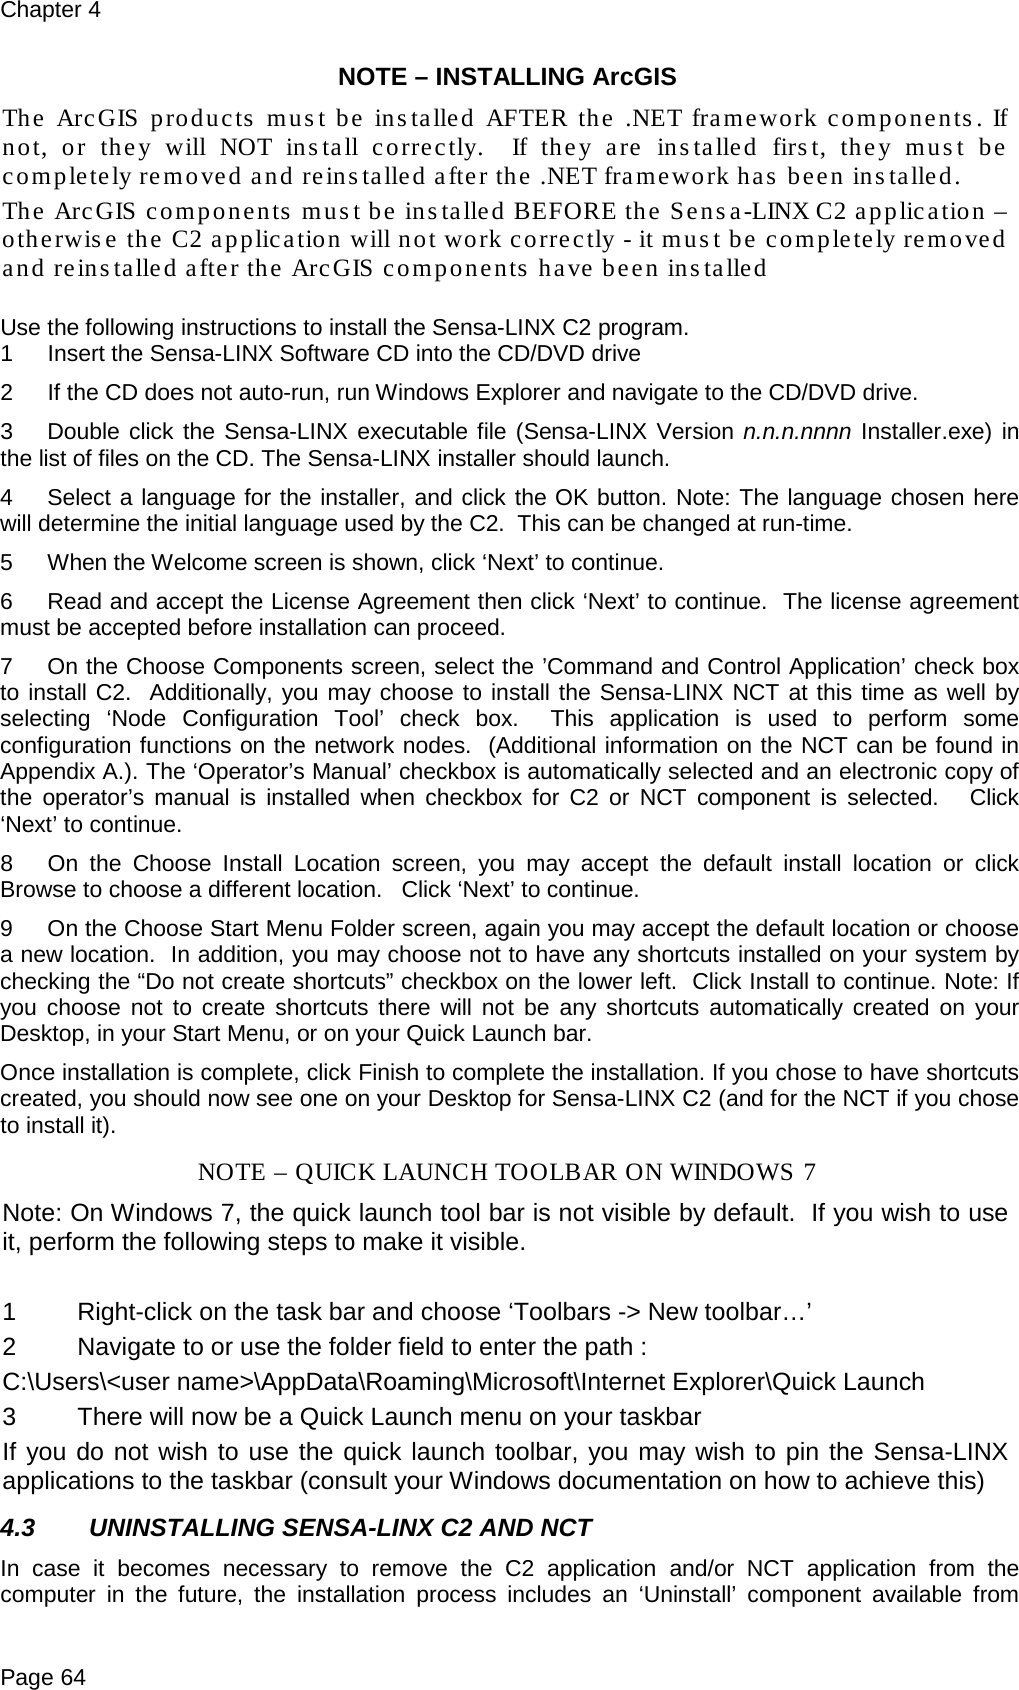 Chapter 4 Page 64 NOTE – INSTALLING ArcGIS The ArcGIS products must be installed AFTER the .NET framework components . If not, or they will NOT install correctly.  If they are installed first, they must be completely removed and reinstalled after the .NET framework has been installed. The ArcGIS components must be installed BEFORE the Sensa-LINX C2 application – otherwise the C2 application will not work correctly - it must be completely removed and reinstalled after the ArcGIS components have been installed  Use the following instructions to install the Sensa-LINX C2 program. 1  Insert the Sensa-LINX Software CD into the CD/DVD drive 2  If the CD does not auto-run, run Windows Explorer and navigate to the CD/DVD drive. 3  Double click the Sensa-LINX executable file (Sensa-LINX Version n.n.n.nnnn Installer.exe) in the list of files on the CD. The Sensa-LINX installer should launch. 4  Select a language for the installer, and click the OK button. Note: The language chosen here will determine the initial language used by the C2.  This can be changed at run-time. 5  When the Welcome screen is shown, click ‘Next’ to continue. 6  Read and accept the License Agreement then click ‘Next’ to continue.  The license agreement must be accepted before installation can proceed. 7  On the Choose Components screen, select the ’Command and Control Application’ check box to install C2.  Additionally, you may choose to install the Sensa-LINX NCT at this time as well by selecting ‘Node Configuration Tool’ check box.  This application is used to perform some configuration functions on the network nodes.  (Additional information on the NCT can be found in Appendix A.). The ‘Operator’s Manual’ checkbox is automatically selected and an electronic copy of the operator’s manual is installed when checkbox for C2 or NCT component is selected.   Click ‘Next’ to continue. 8  On the Choose Install Location screen, you may accept the default install location or click Browse to choose a different location.   Click ‘Next’ to continue. 9  On the Choose Start Menu Folder screen, again you may accept the default location or choose a new location.  In addition, you may choose not to have any shortcuts installed on your system by checking the “Do not create shortcuts” checkbox on the lower left.  Click Install to continue. Note: If you choose not to create shortcuts there will not be any shortcuts automatically created on your Desktop, in your Start Menu, or on your Quick Launch bar. Once installation is complete, click Finish to complete the installation. If you chose to have shortcuts created, you should now see one on your Desktop for Sensa-LINX C2 (and for the NCT if you chose to install it). NOTE – QUICK LAUNCH TOOLBAR ON WINDOWS 7 Note: On Windows 7, the quick launch tool bar is not visible by default.  If you wish to use it, perform the following steps to make it visible.   1  Right-click on the task bar and choose ‘Toolbars -&gt; New toolbar…’ 2  Navigate to or use the folder field to enter the path : C:\Users\&lt;user name&gt;\AppData\Roaming\Microsoft\Internet Explorer\Quick Launch 3  There will now be a Quick Launch menu on your taskbar If you do not wish to use the quick launch toolbar, you may wish to pin the Sensa-LINX applications to the taskbar (consult your Windows documentation on how to achieve this) 4.3 UNINSTALLING SENSA-LINX C2 AND NCT In case it becomes necessary to remove the C2 application and/or NCT application from the computer in the future, the installation process includes an ‘Uninstall’ component available from 